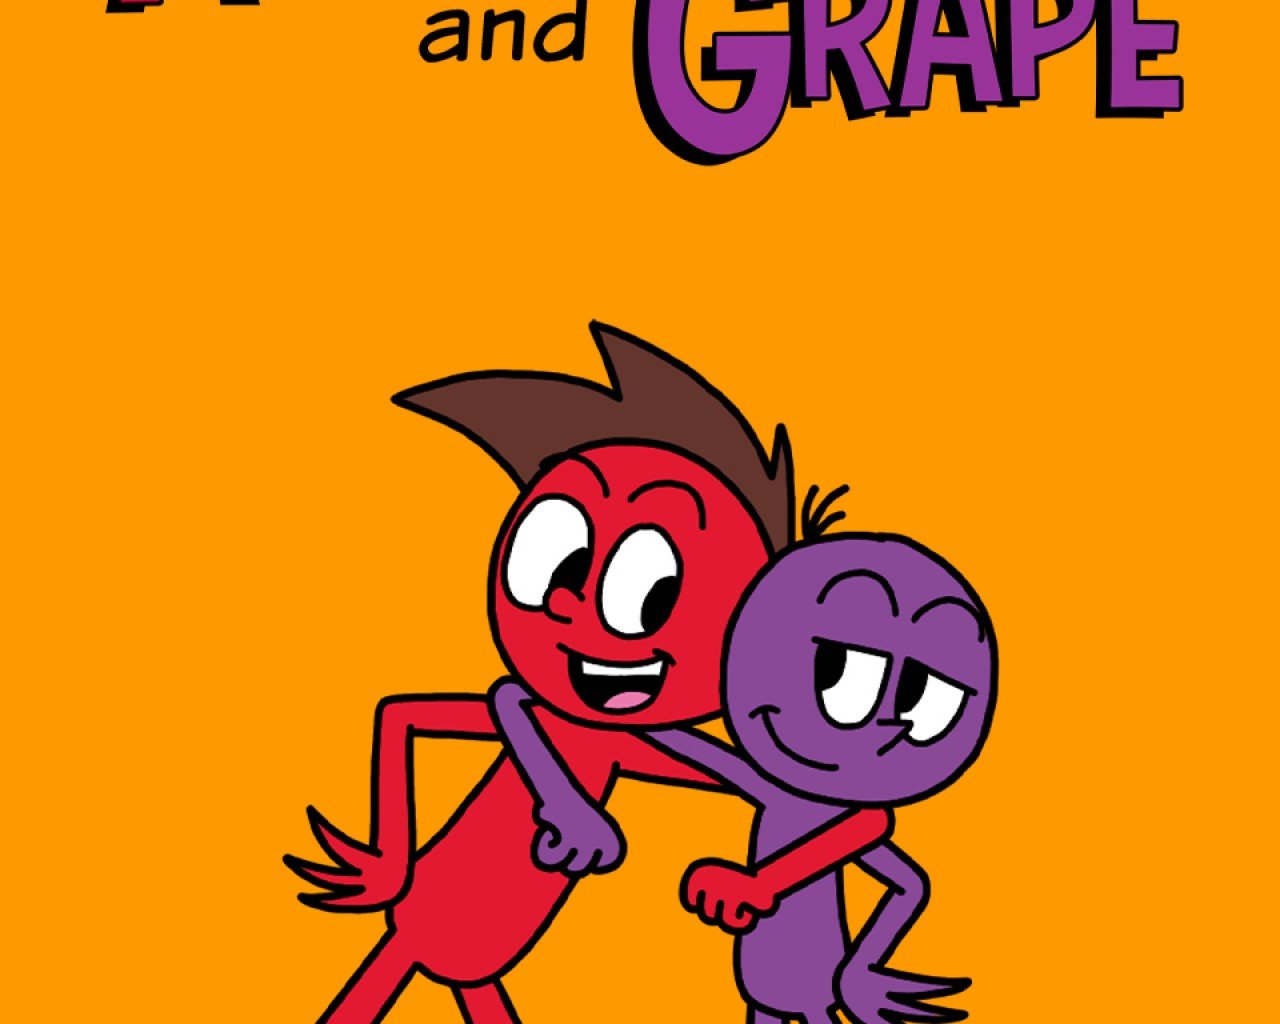 Poster Image for Apple and Grape